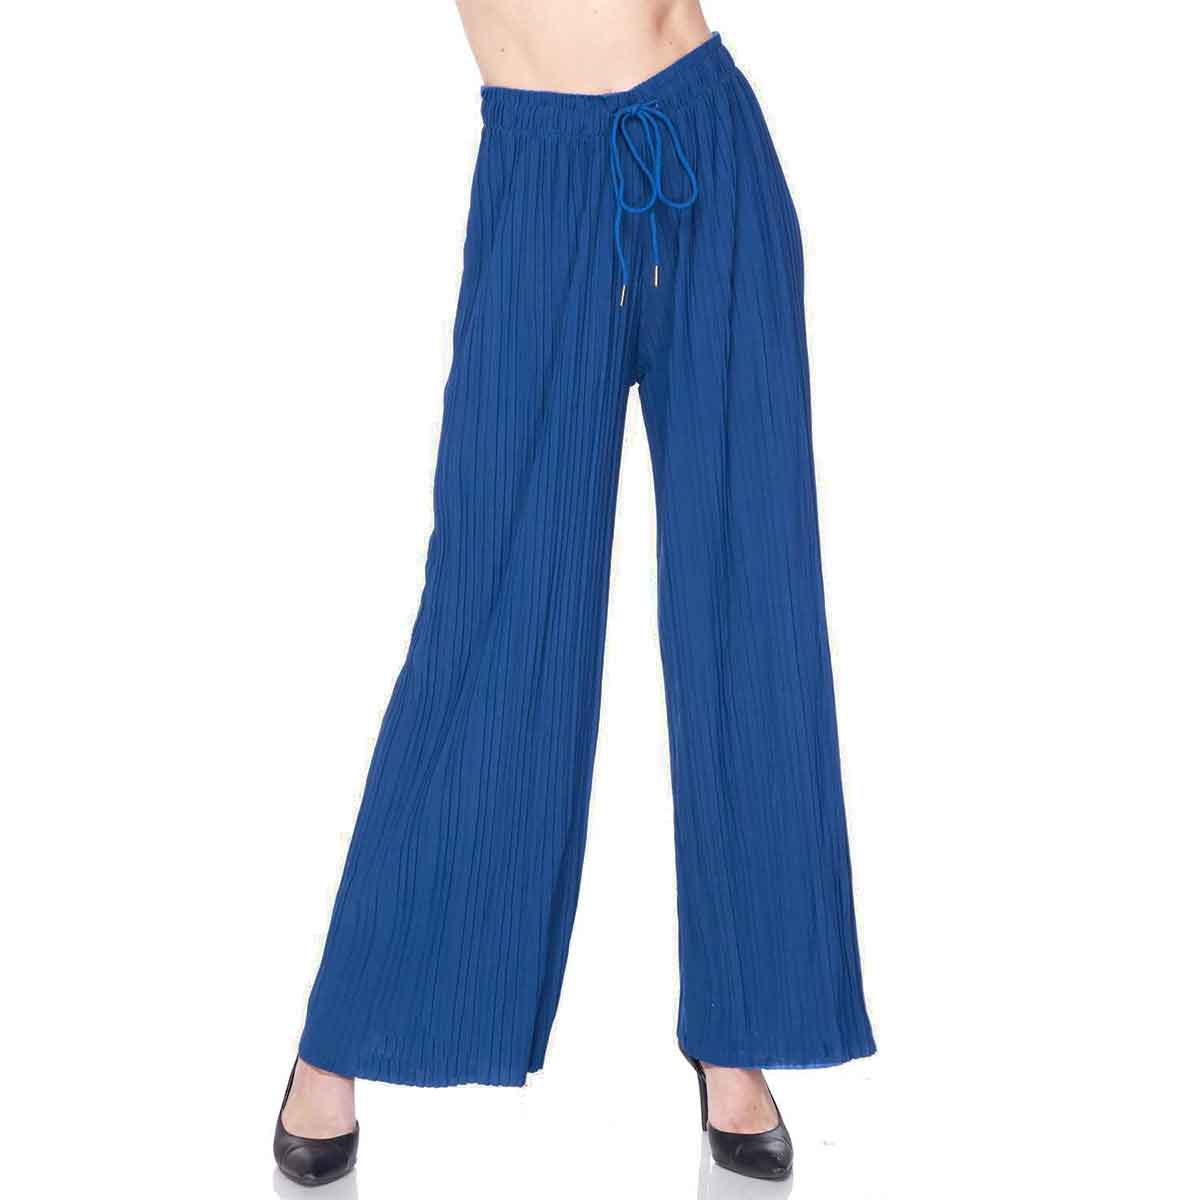 Royal<br>
Stretch Twill Pleated Wide Leg Pants